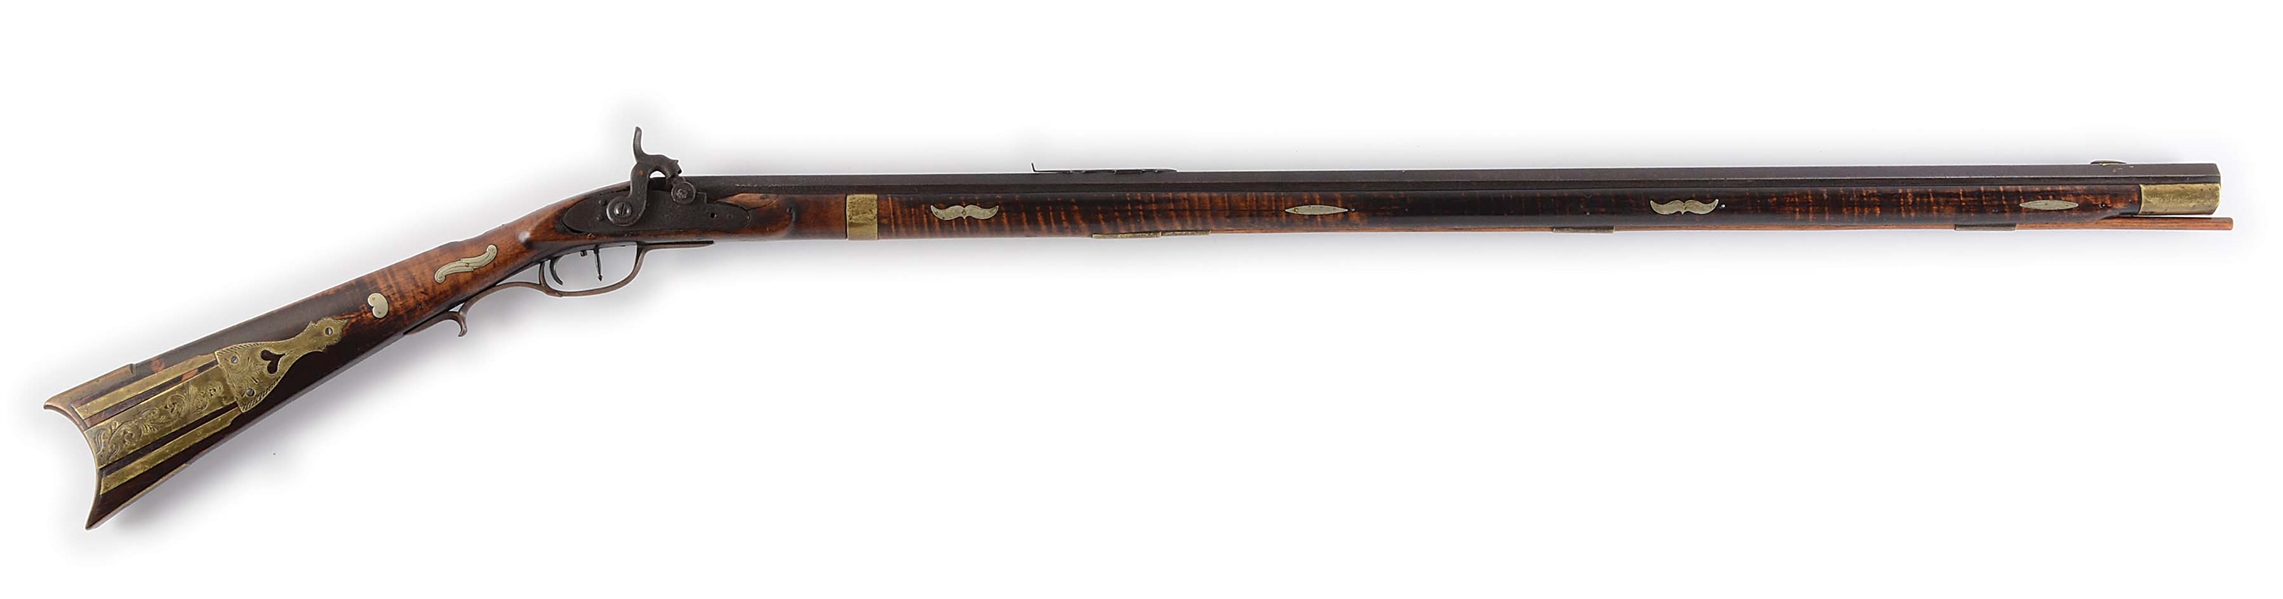 (A) FINE SILVER INLAID HUNTINGDON COUNTY PERCUSSION KENTUCKY RIFLE SIGNED BY J. DOUGLASS.